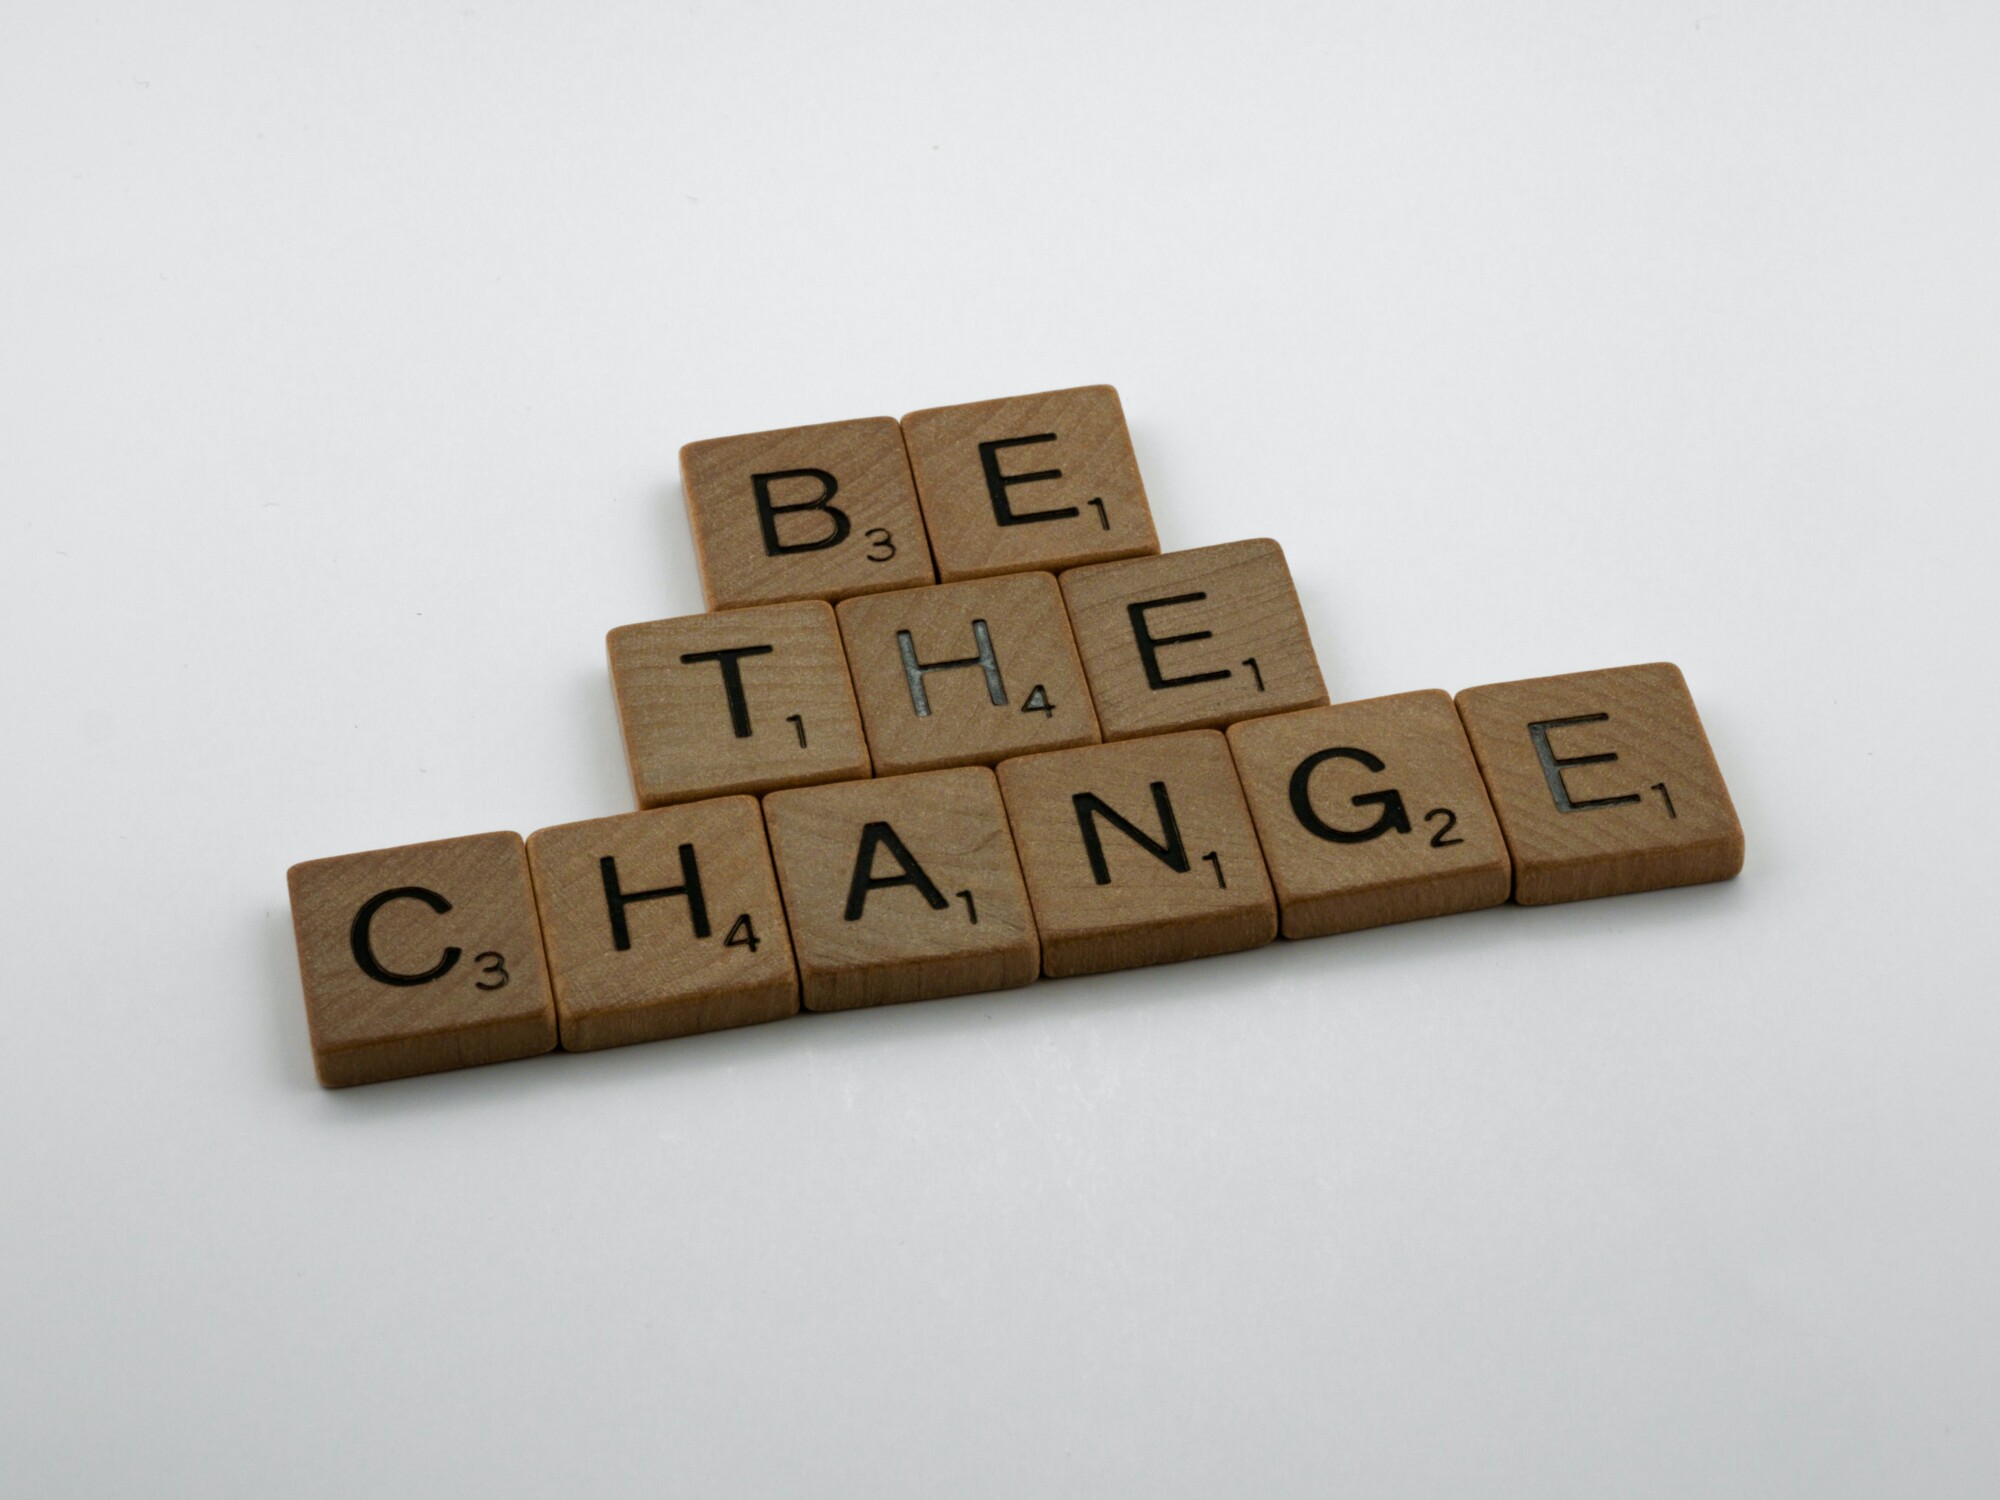 Scrabble pieces defining to be the change